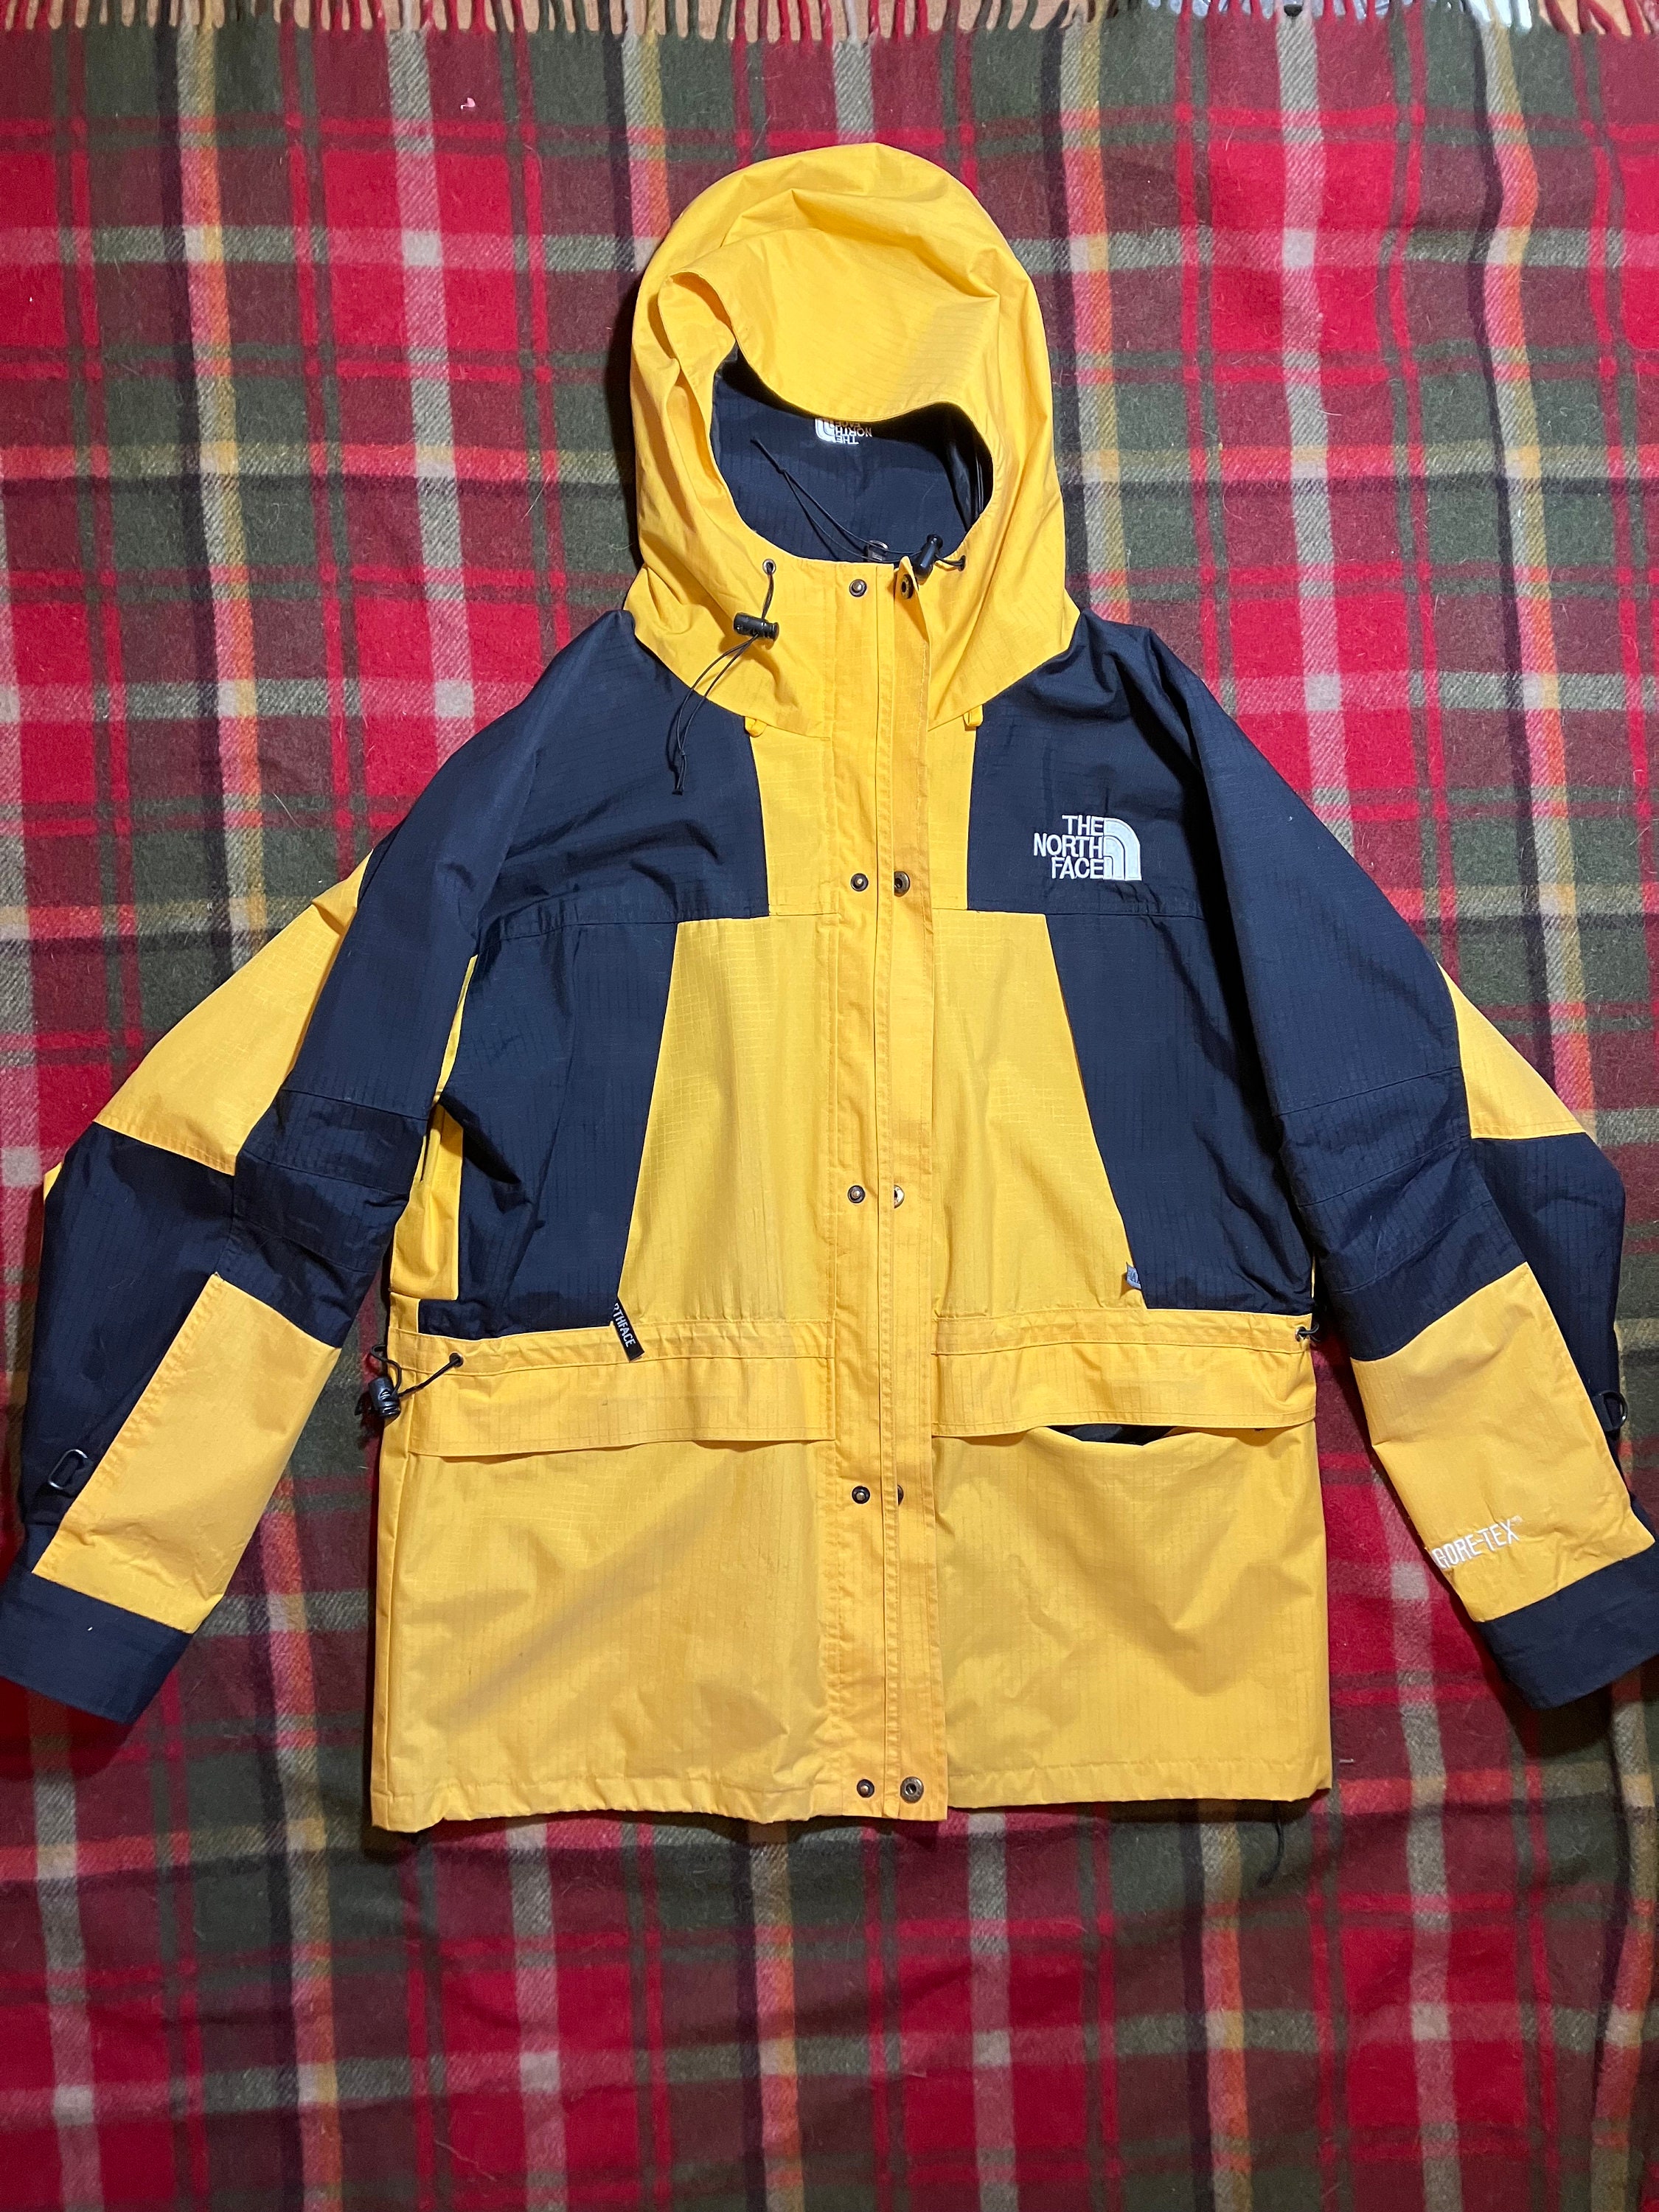 The North Face Summit Series Mountain Jacket Goretex XCR Yellow Grey Men's  Large